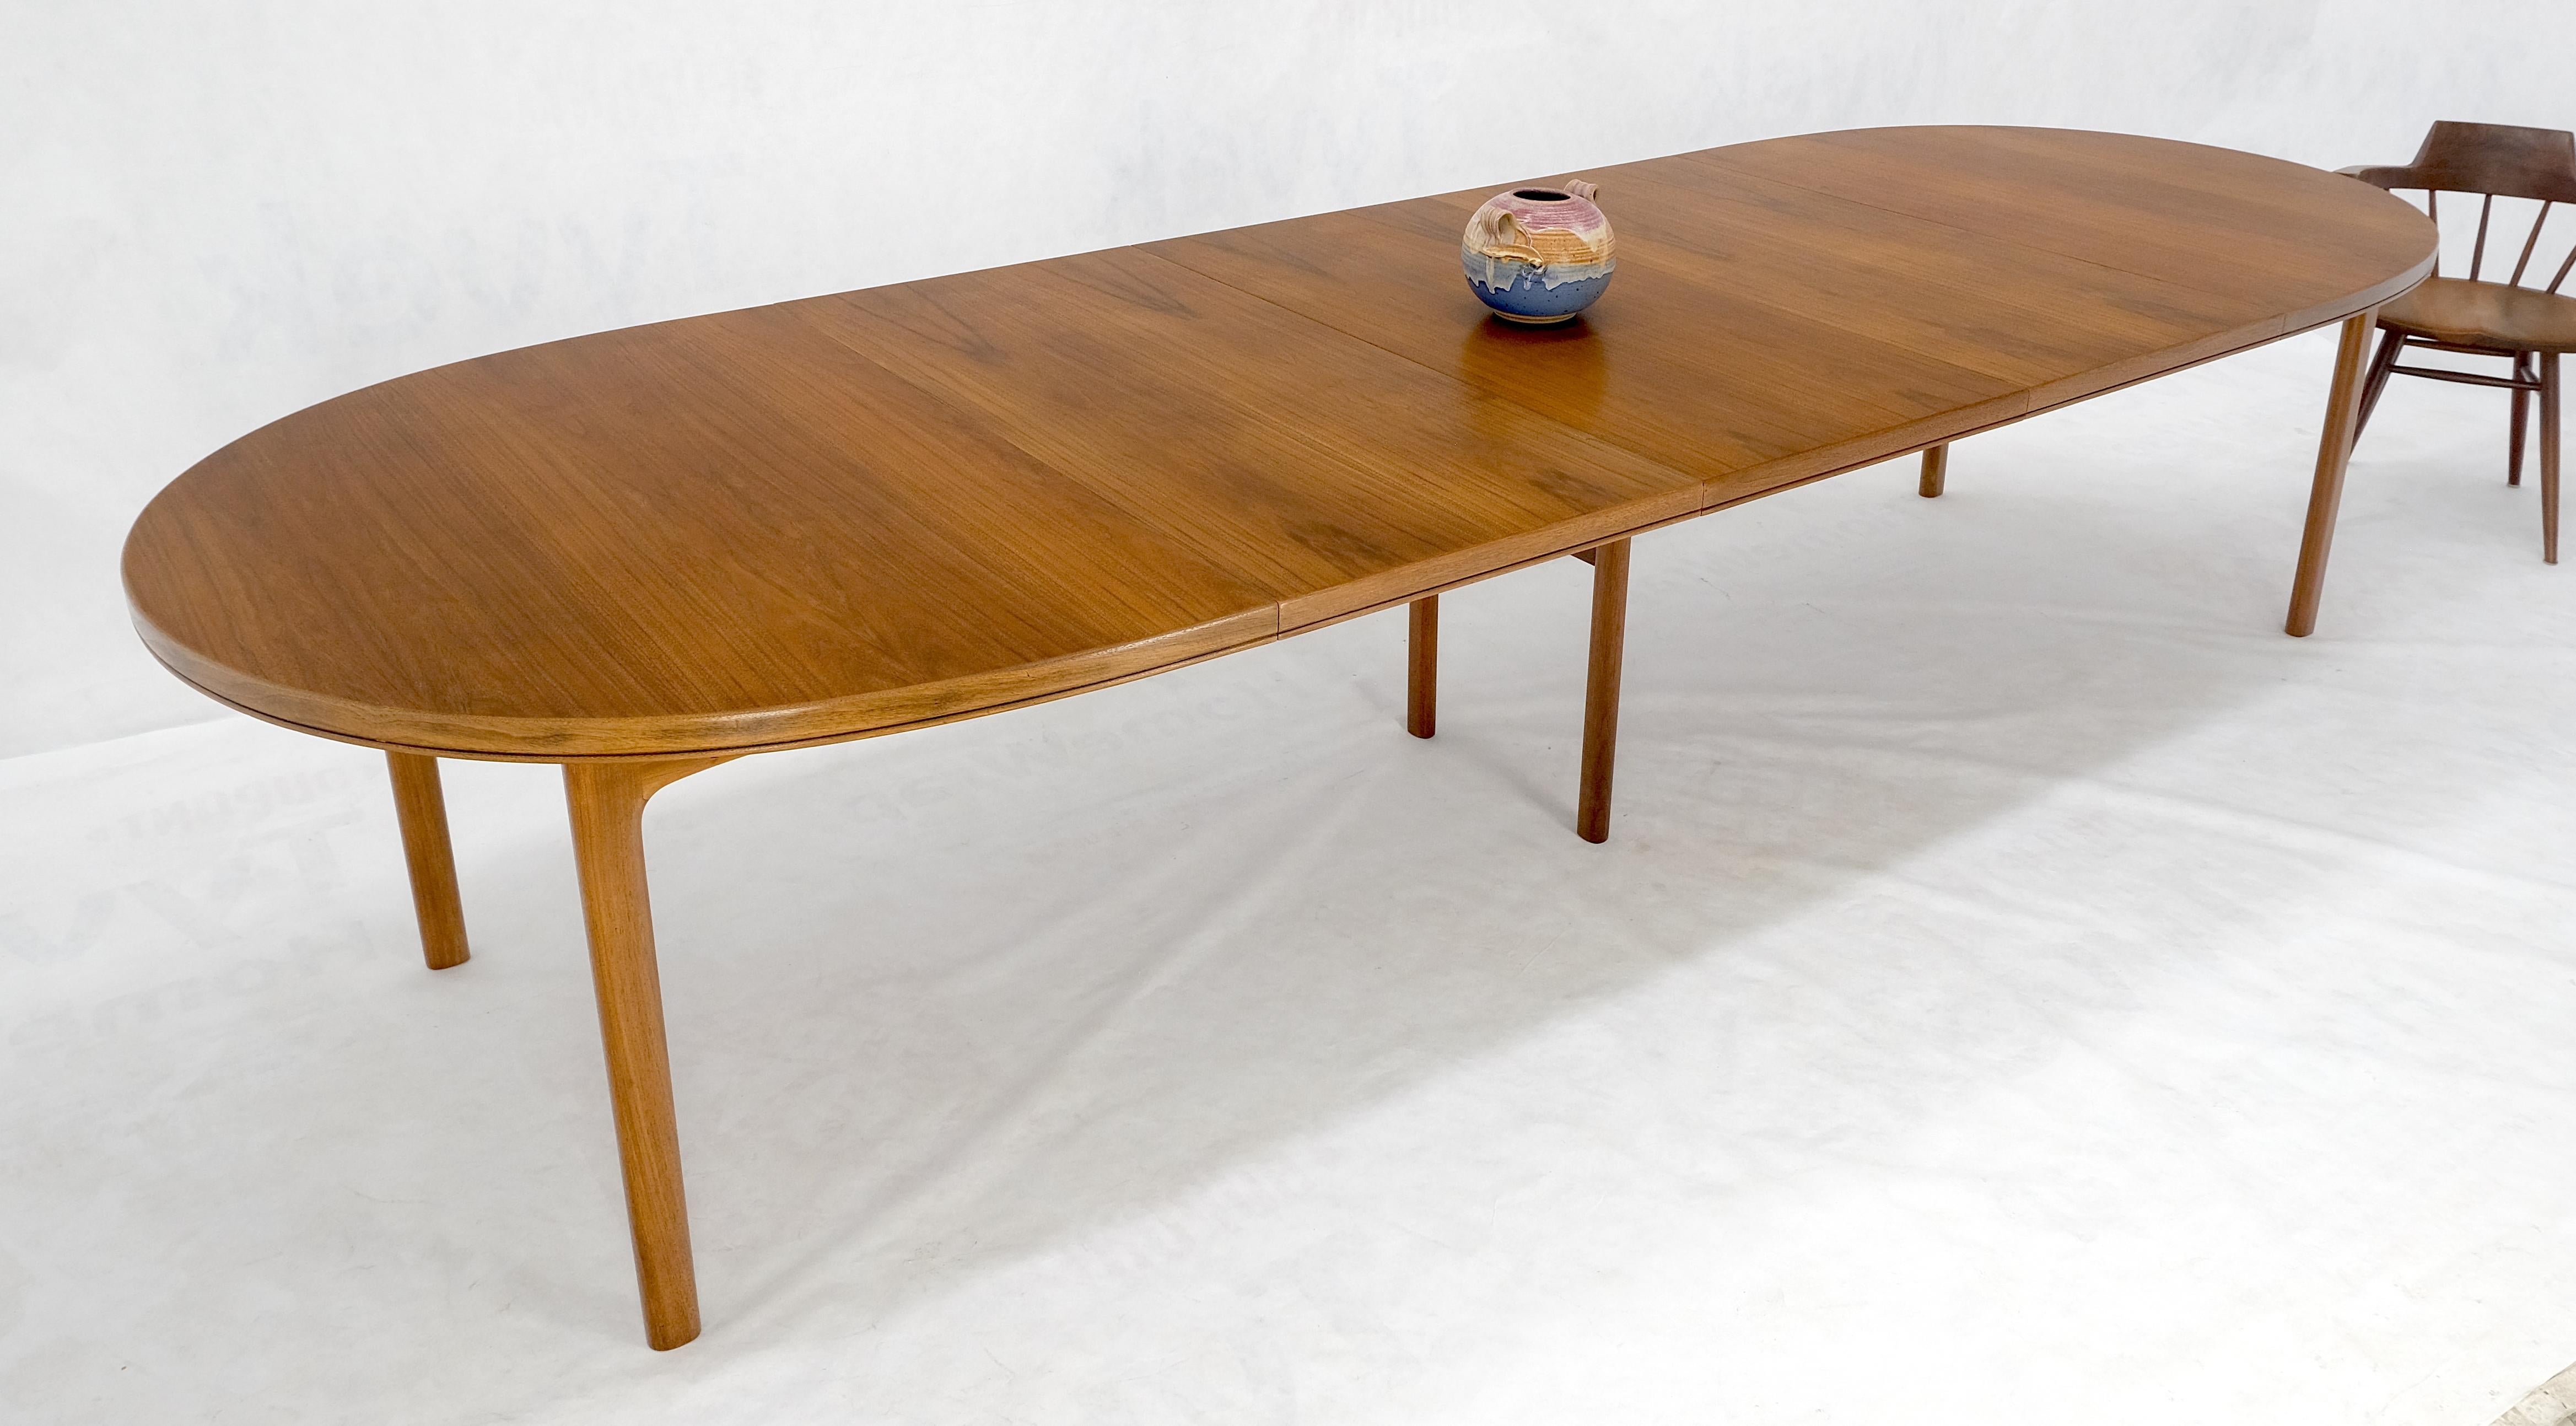 Dux of Sweden Oval Walnut Danish Dining Table w/ 3Leaves Total 135